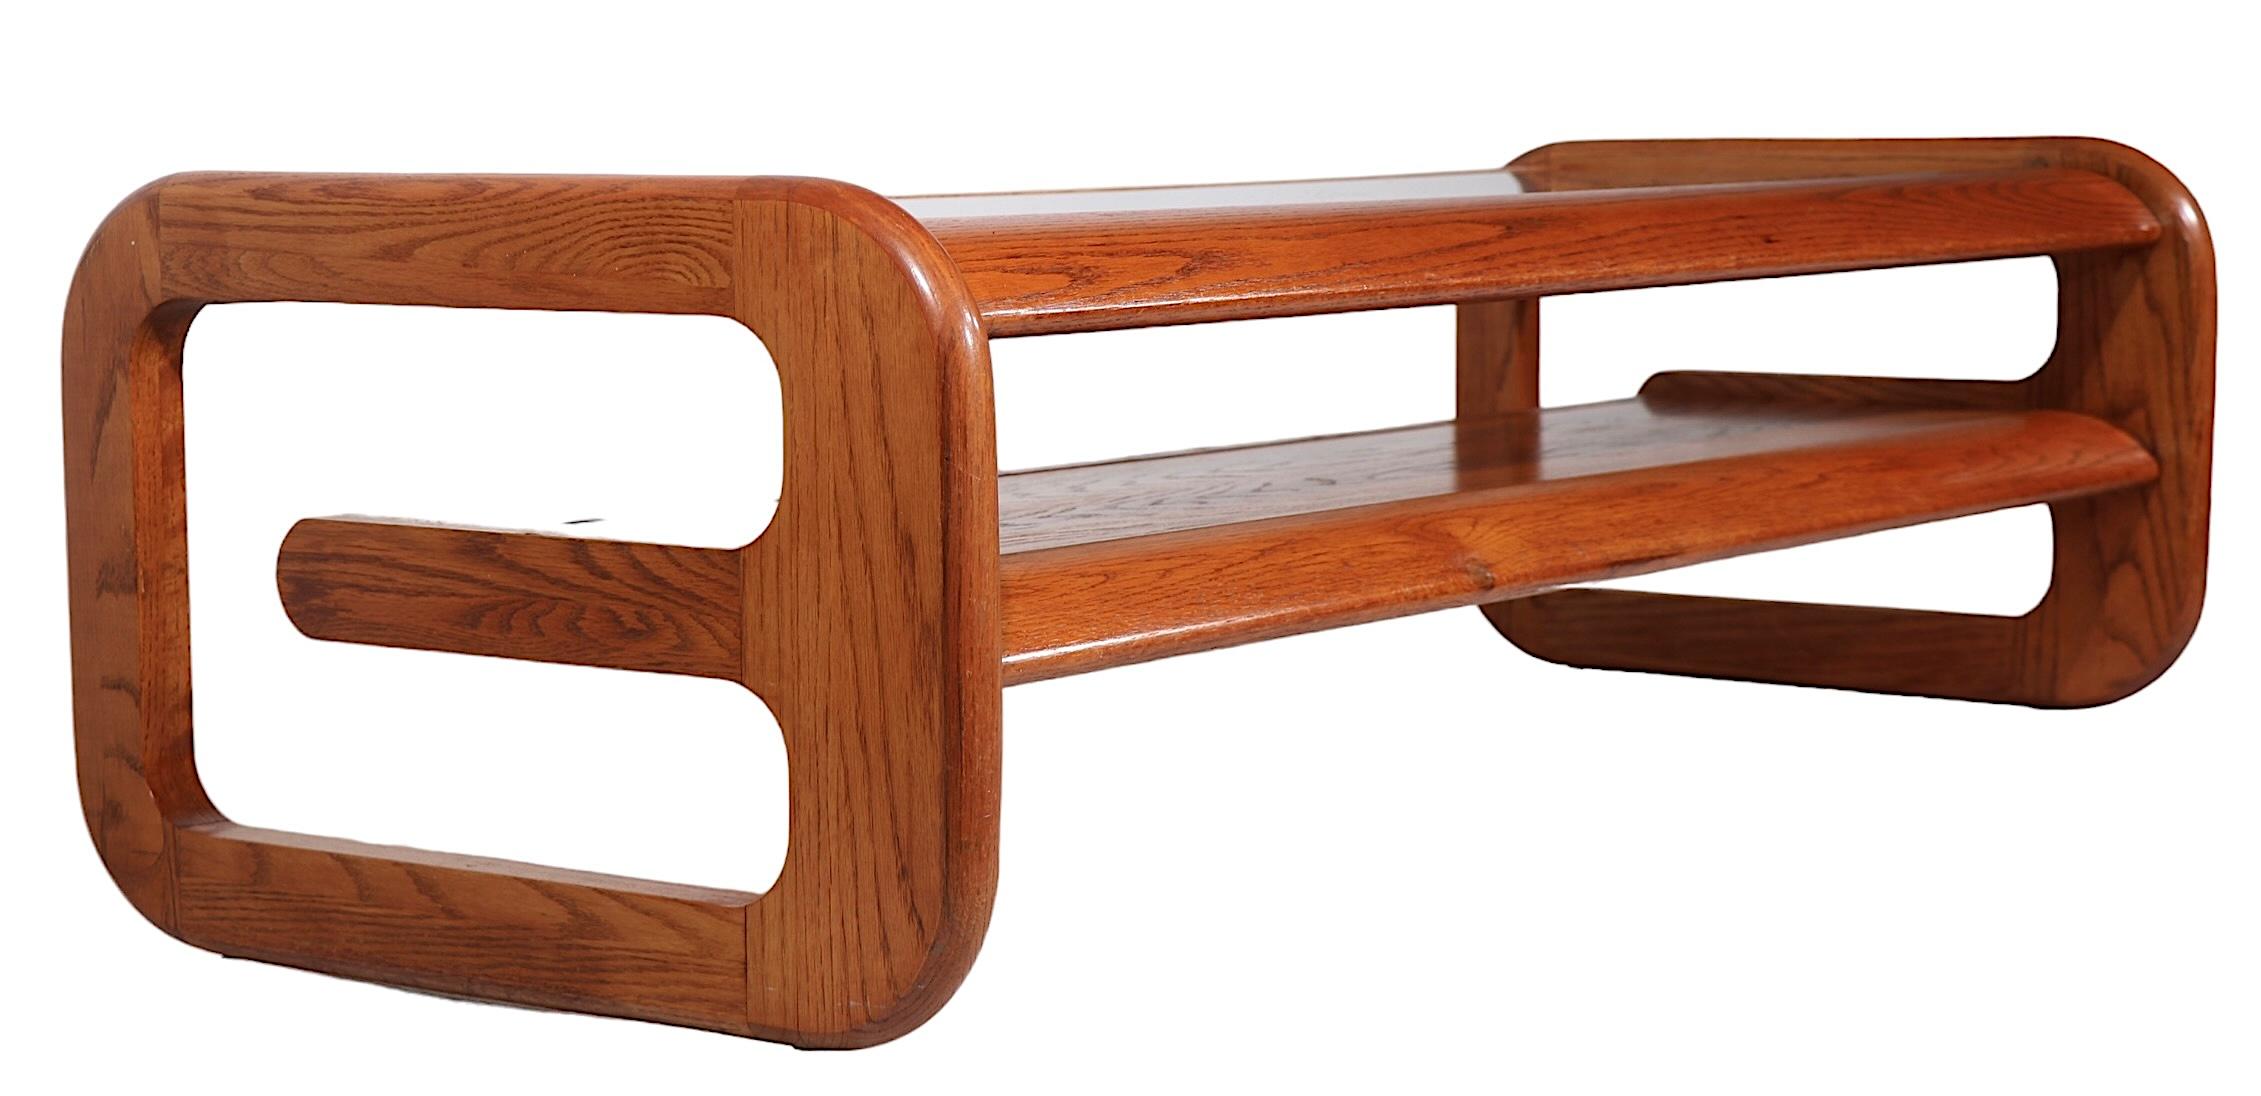 Late 20th Century  Post Modern Oak and Glass Coffee Table by Lou Hodges for Mersman  c. 1970's For Sale